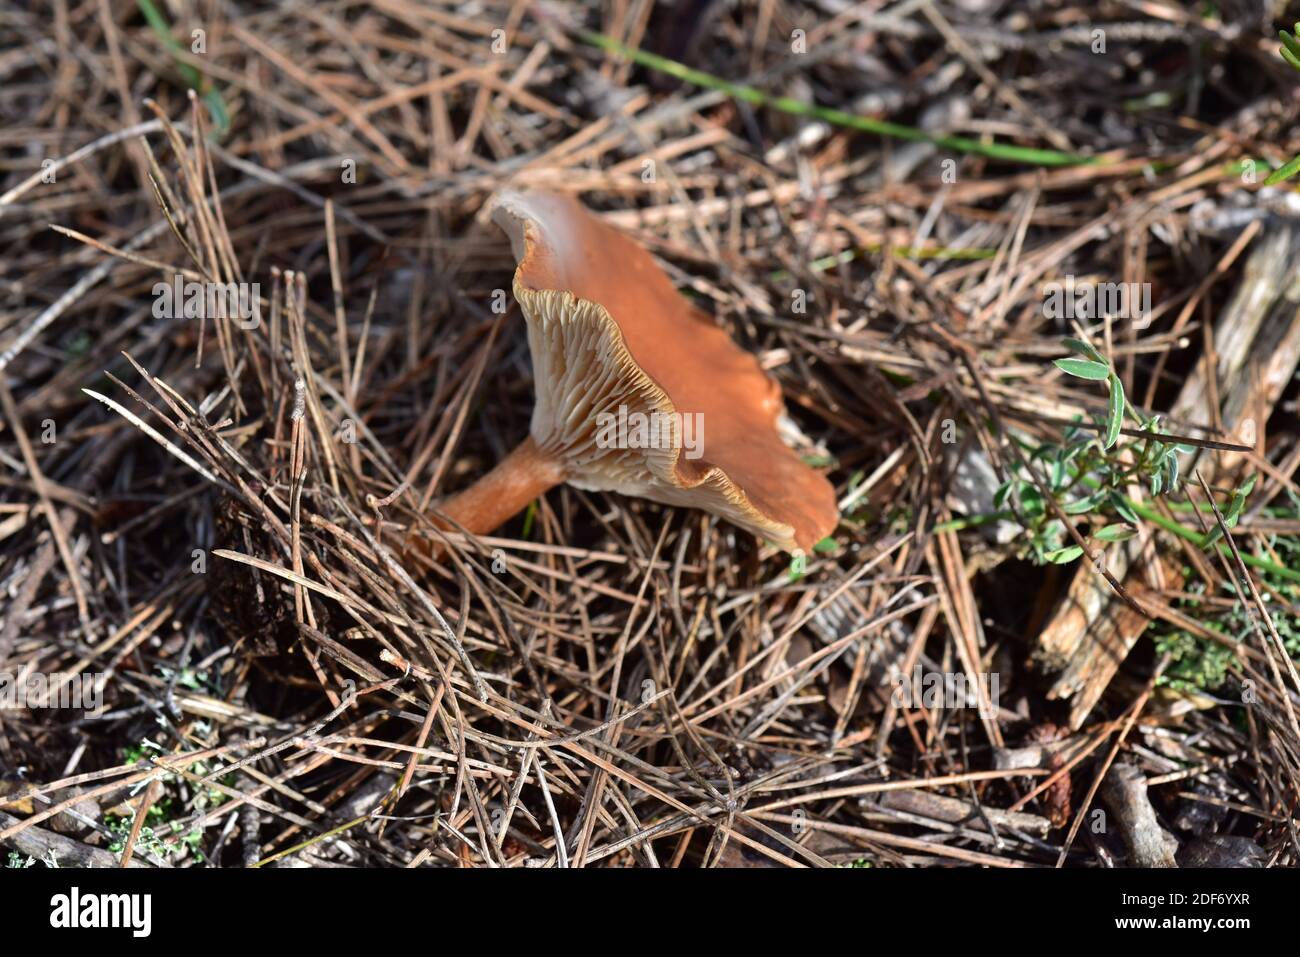 Funnel mushroom (Clitocybe gibba). This photo was taken in Anoia, Barcelona province, Catalonia, Spain. Stock Photo